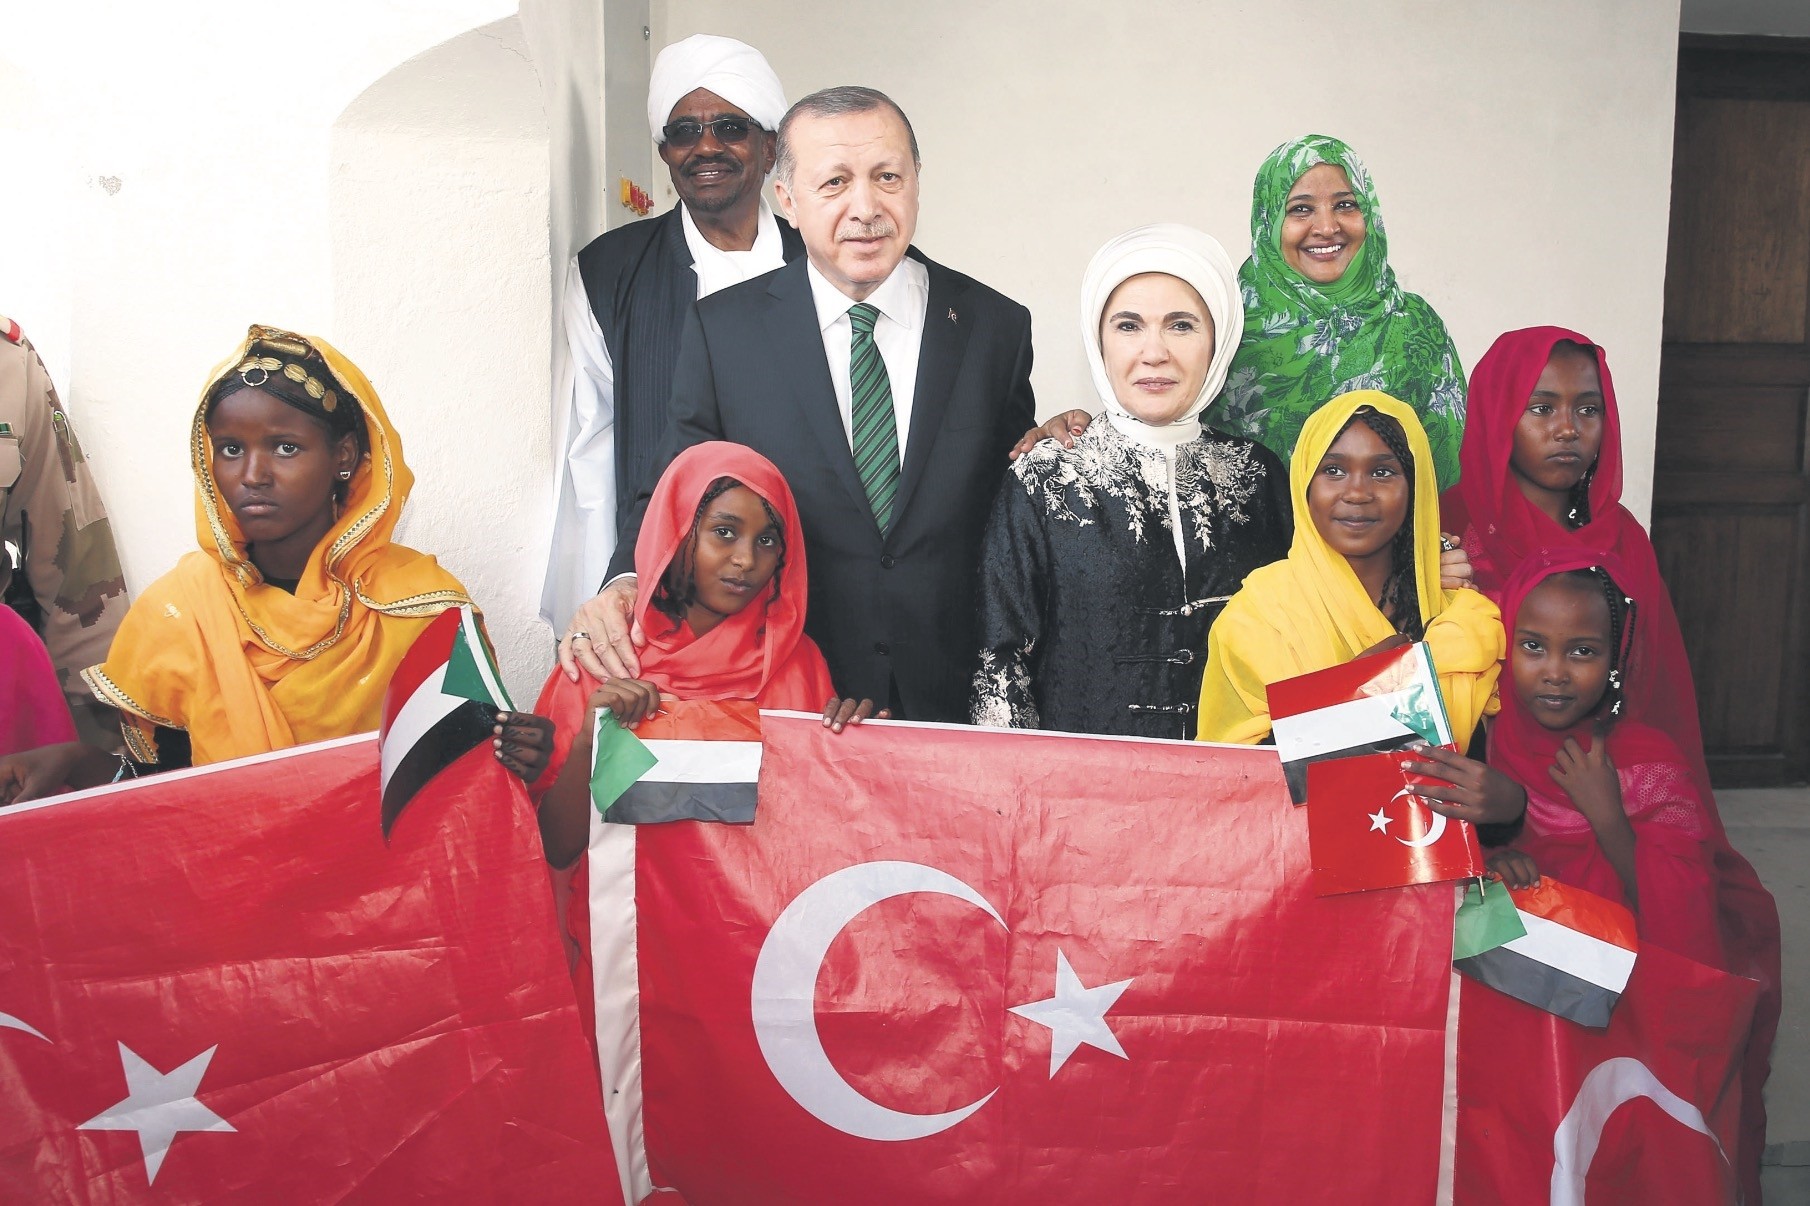 President Erdou011fan (C), accompanied by first lady Emine Erdou011fan, pose for a photograph with Sudan's President Omar al-Bashir and first lady Widad Babiker u00d6mer Modawi alongside local people holding the Sudanese and Turkish flags in Port Sudan, Dec. 25.